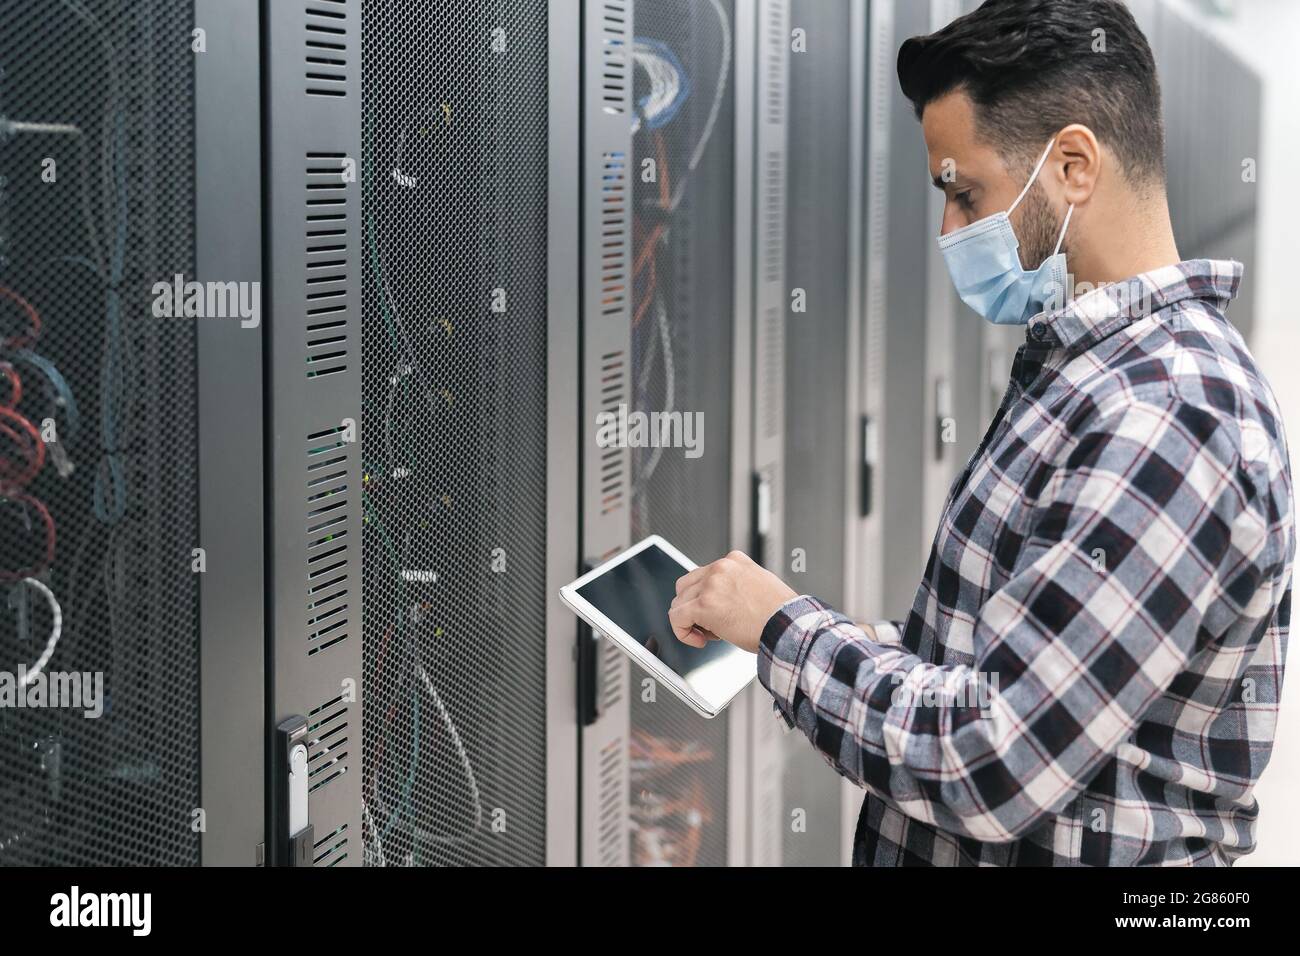 Male informatic engineer working inside server room database while wearing face mask during corona virus outbreak Stock Photo